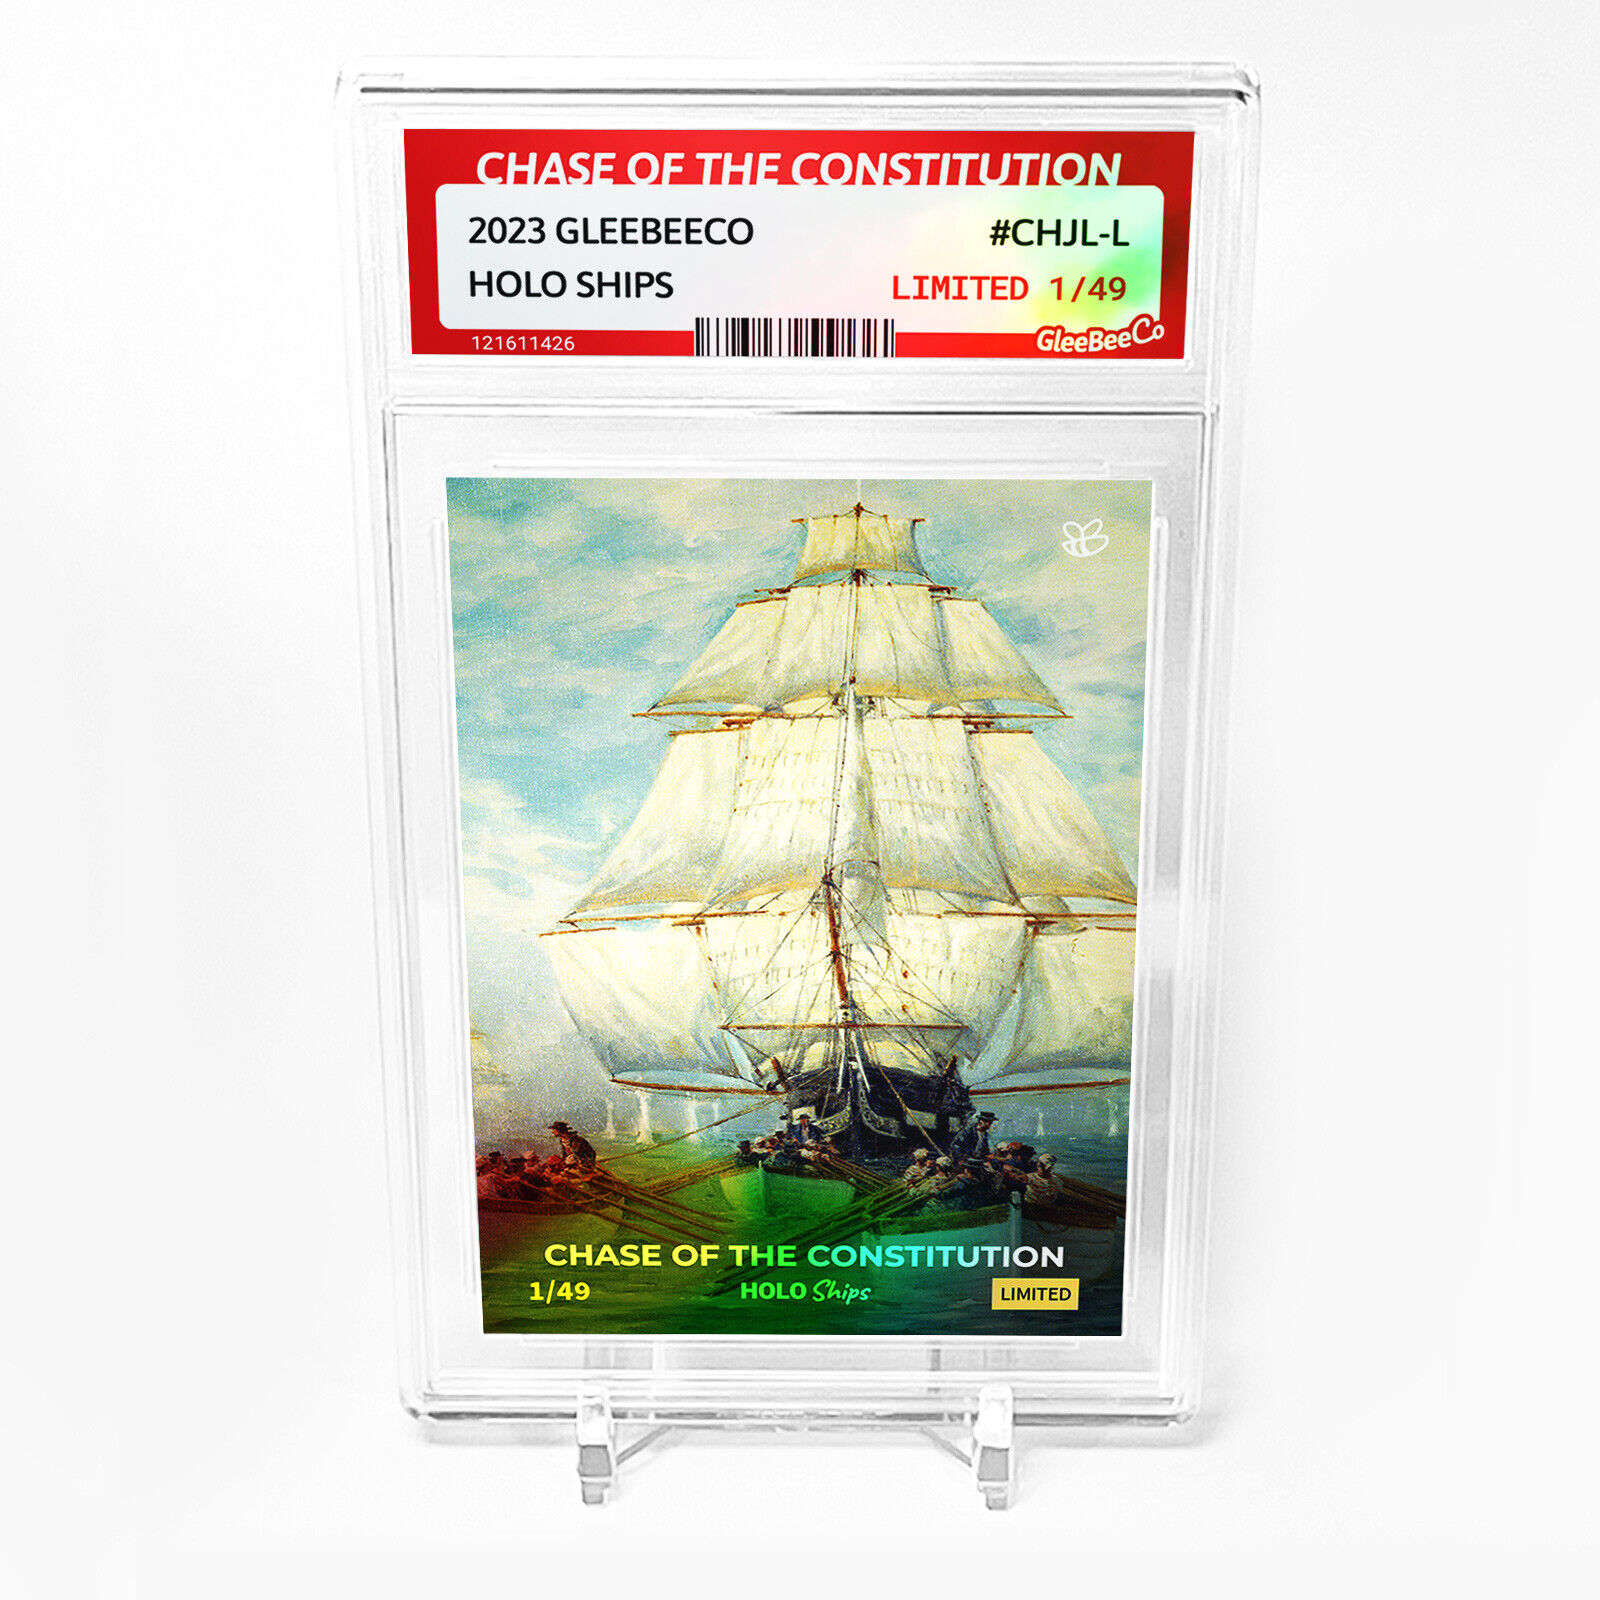 CHASE OF THE CONSTITUTION Art Card 2023 GleeBeeCo Holo Ships Slabbed #CHJL-L /49